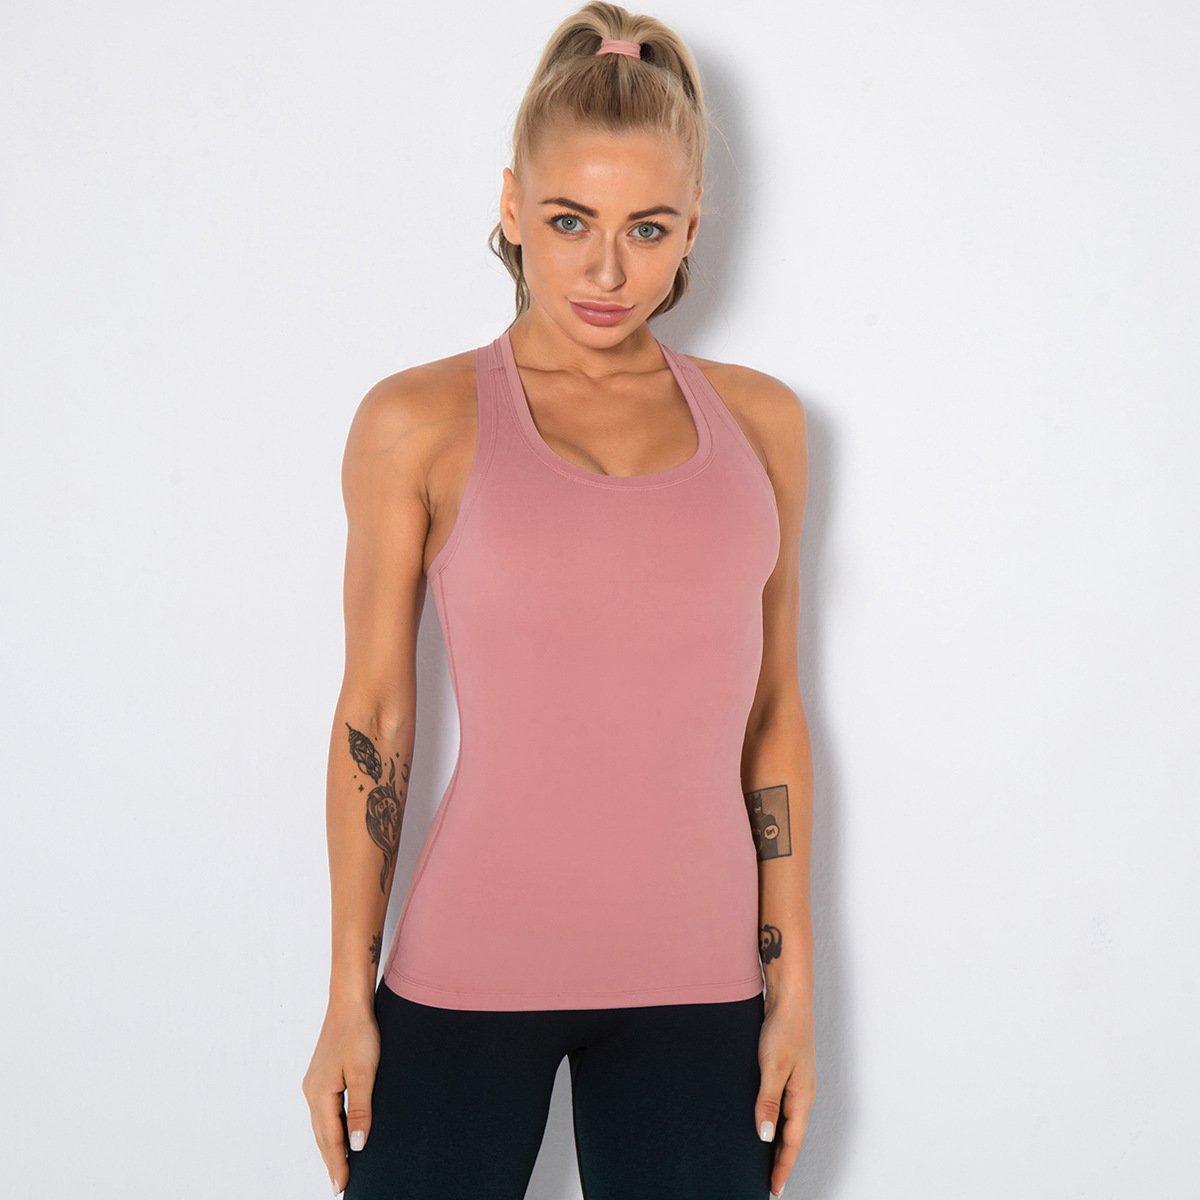 High Elastic Slim Fit Stringer Tank Women With Cups Sports Shirt Sleeveless T-shirt Sweat-wicking Quick-dry Fitness Tank Tops